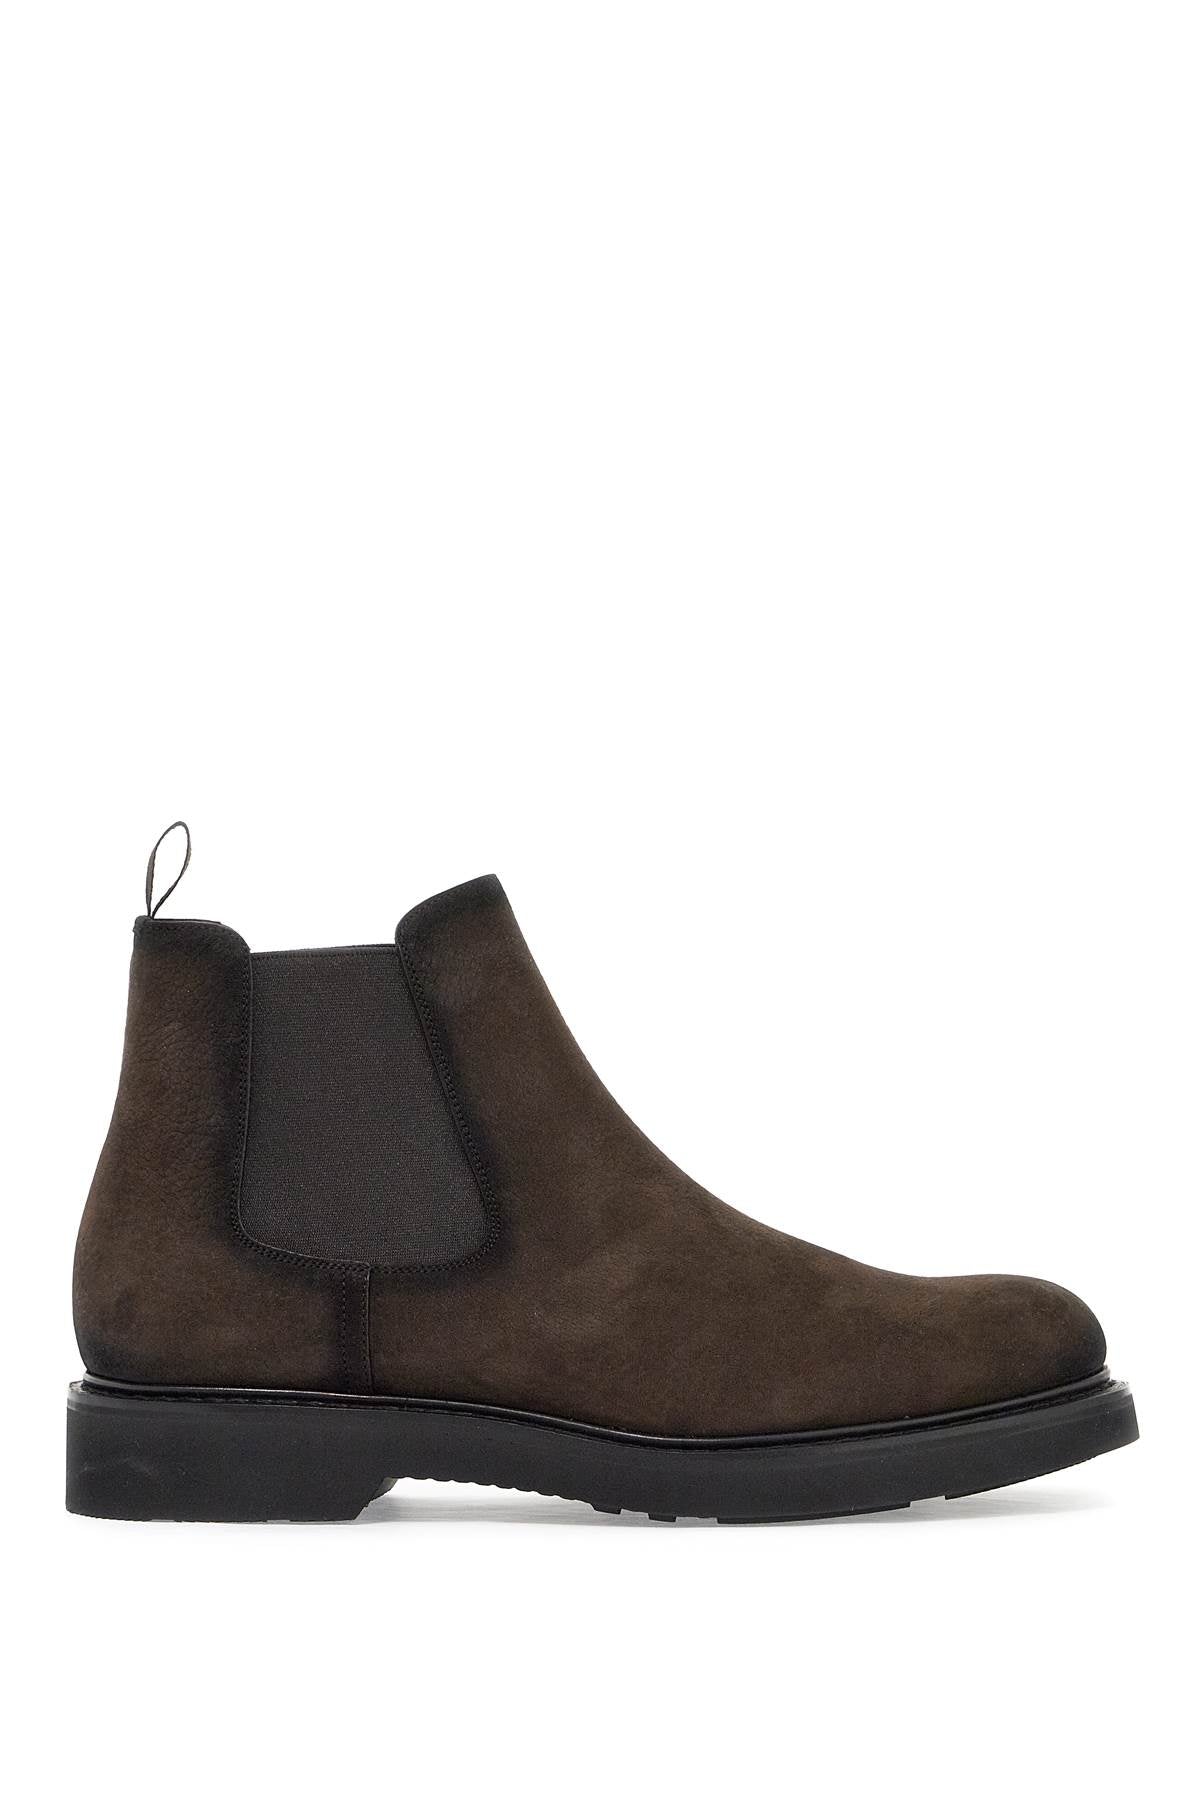 CHURCH'S CHELSEA ANKLE BOOTS